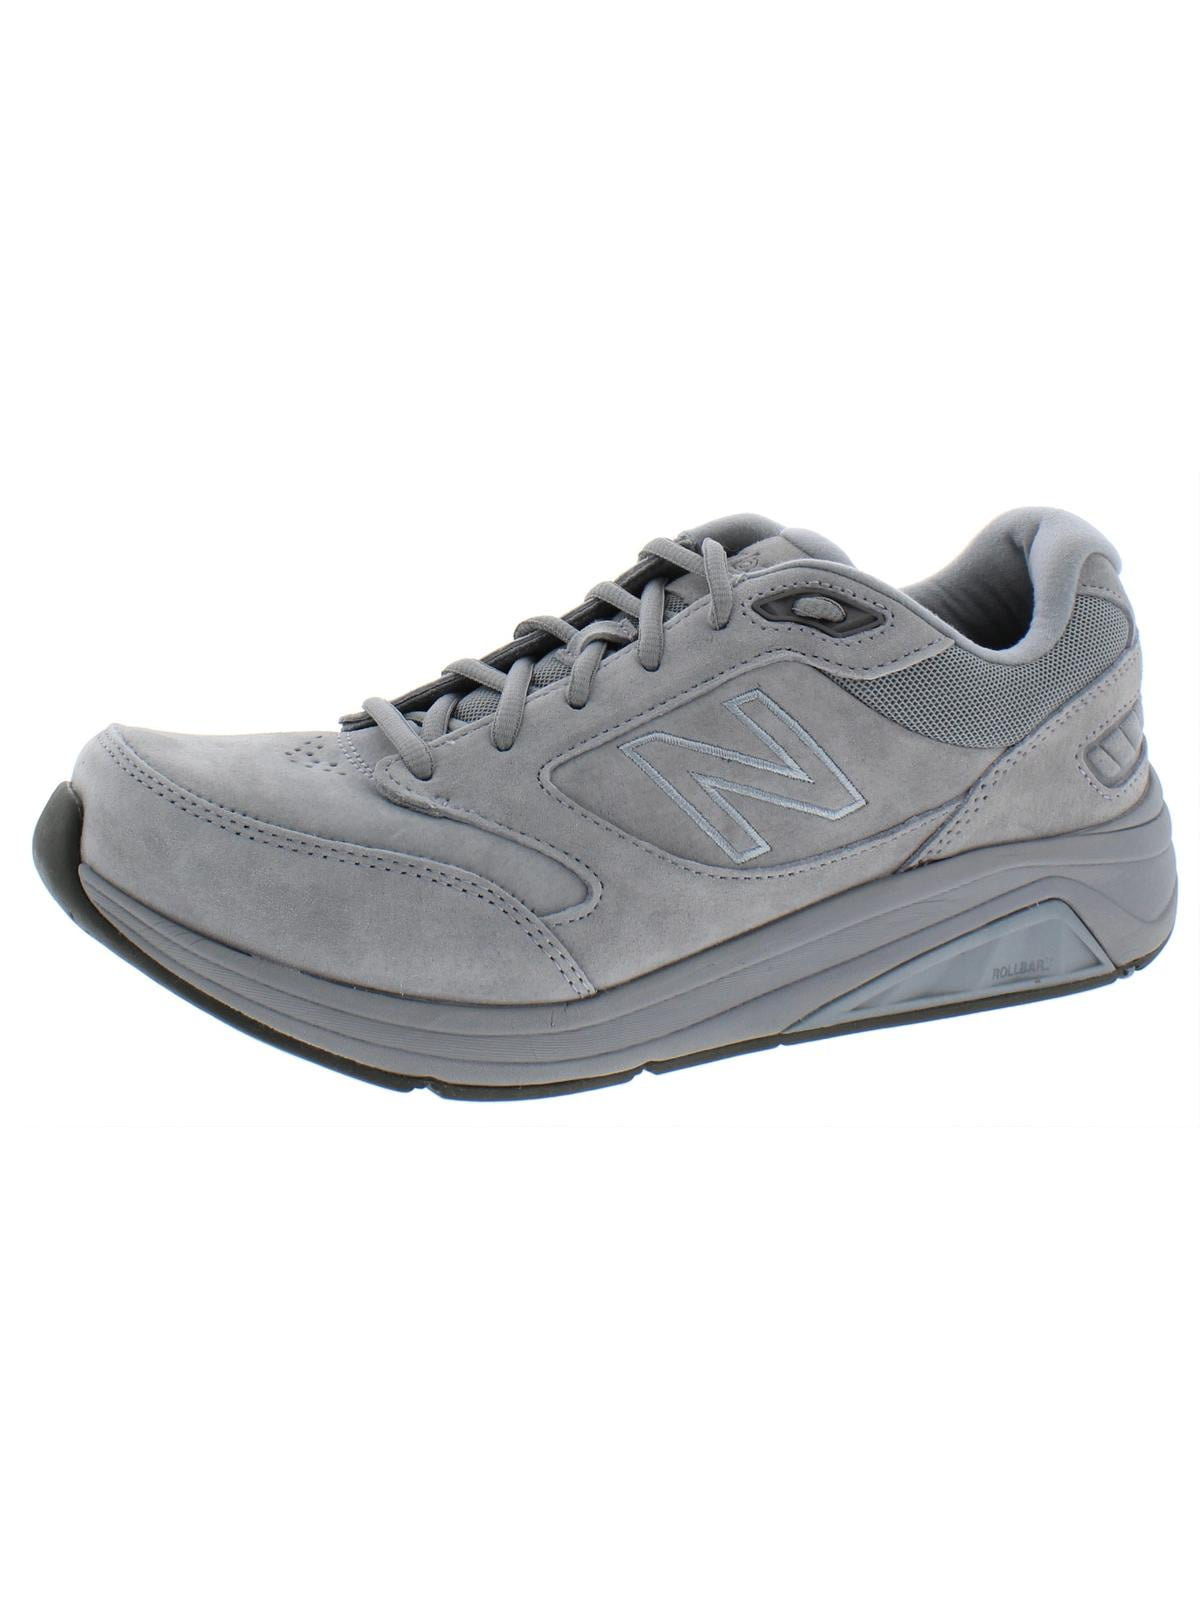 new balance wide walking shoes